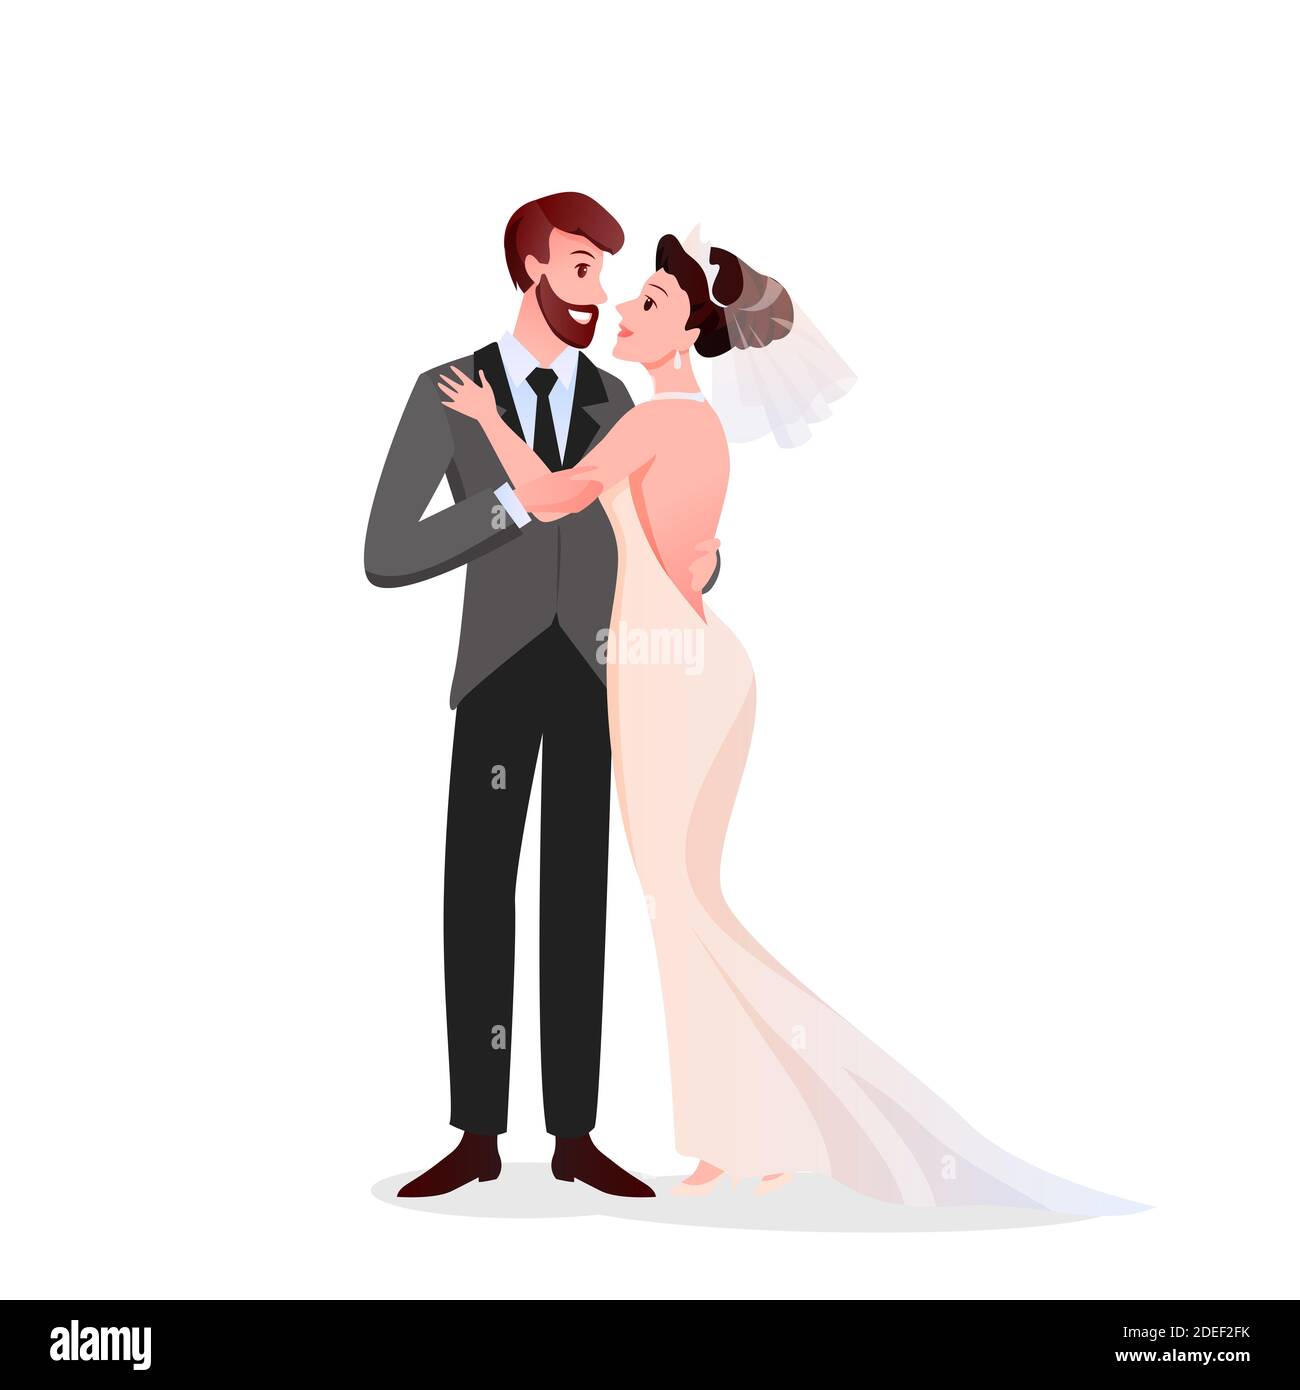 Bride and groom fashion, man in suit, woman in wedding dress Stock Photo